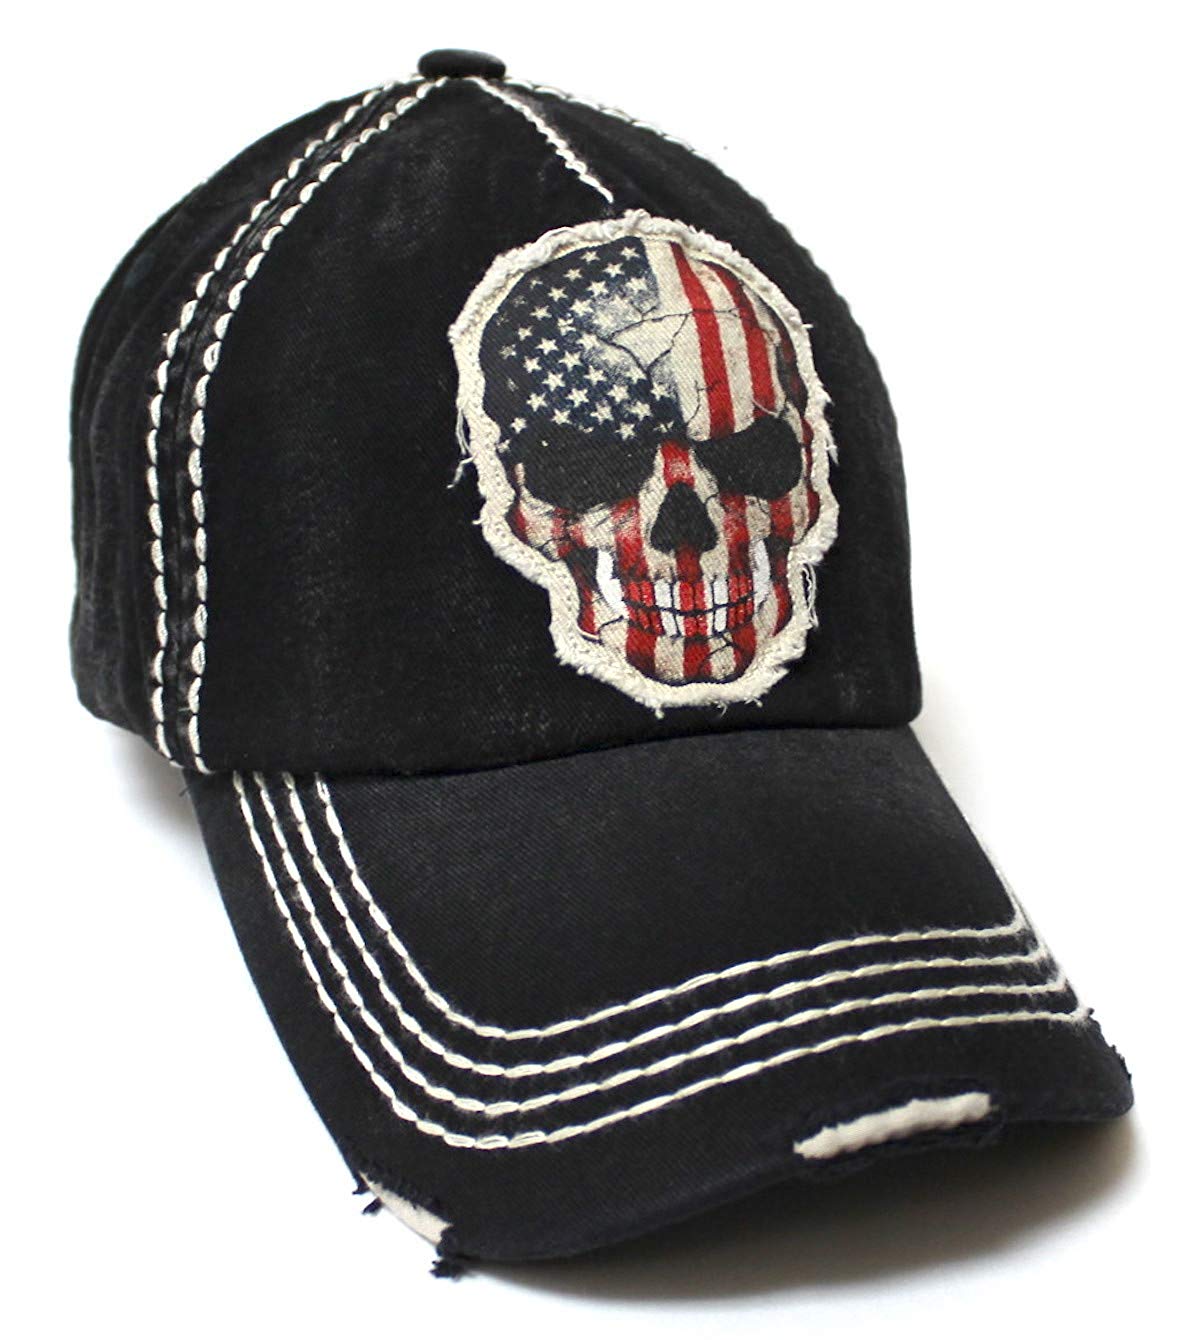 Classic Ballcap American Flag Skull Patch Embroidery Vintage Hat, Black - Caps 'N Vintage 